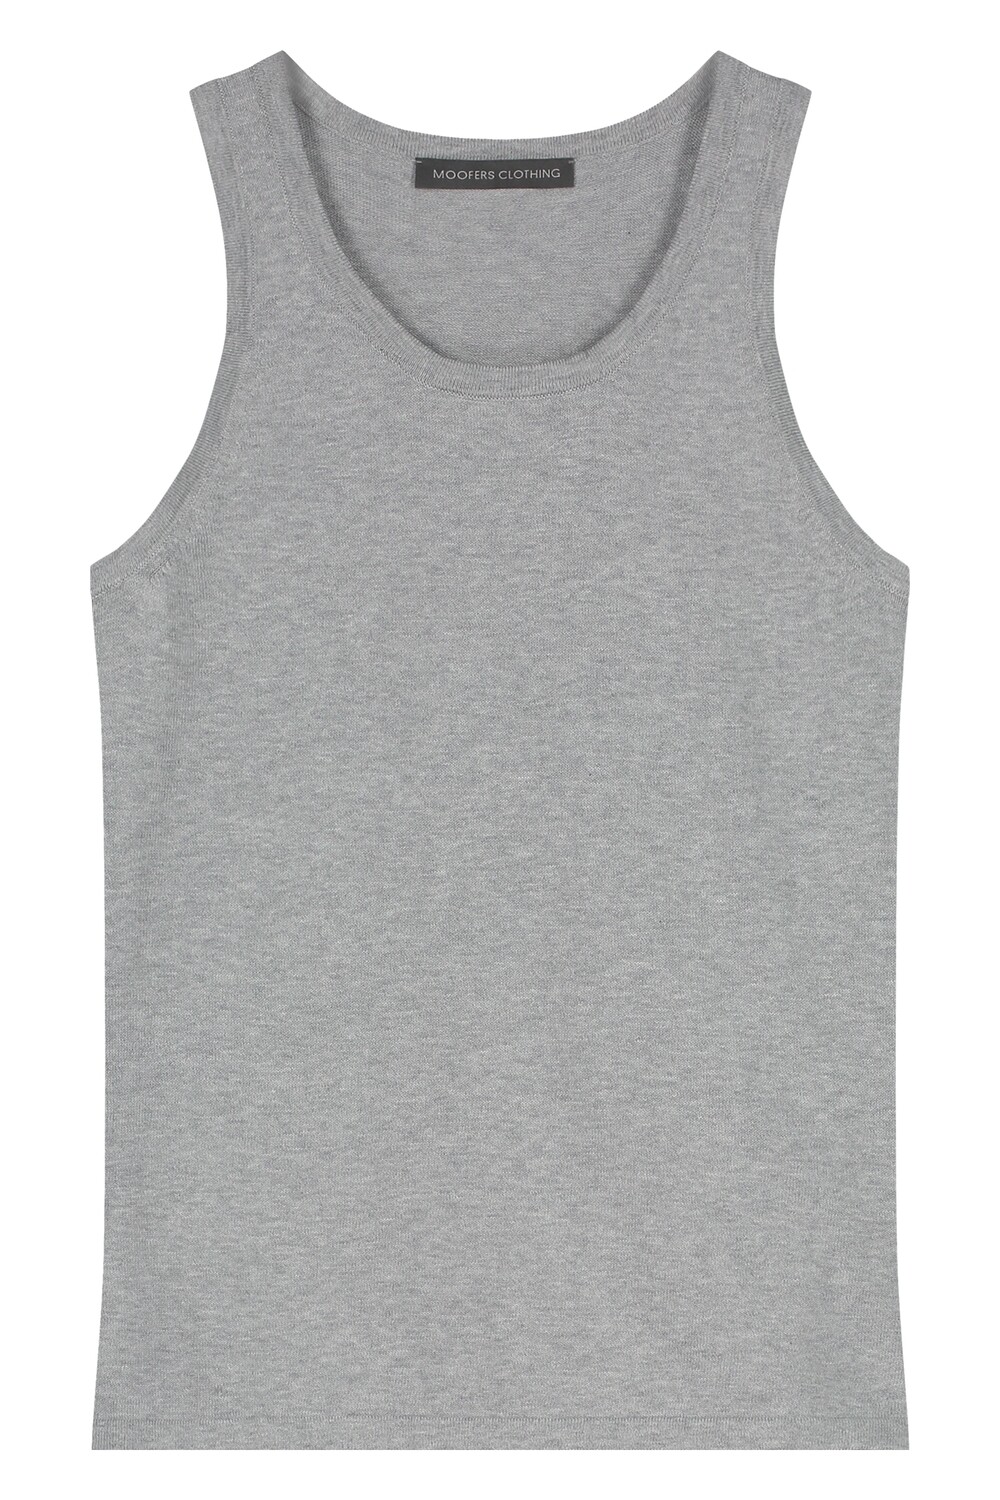 KNITTED TANK TOP ORGANIC COTTON IN GREY